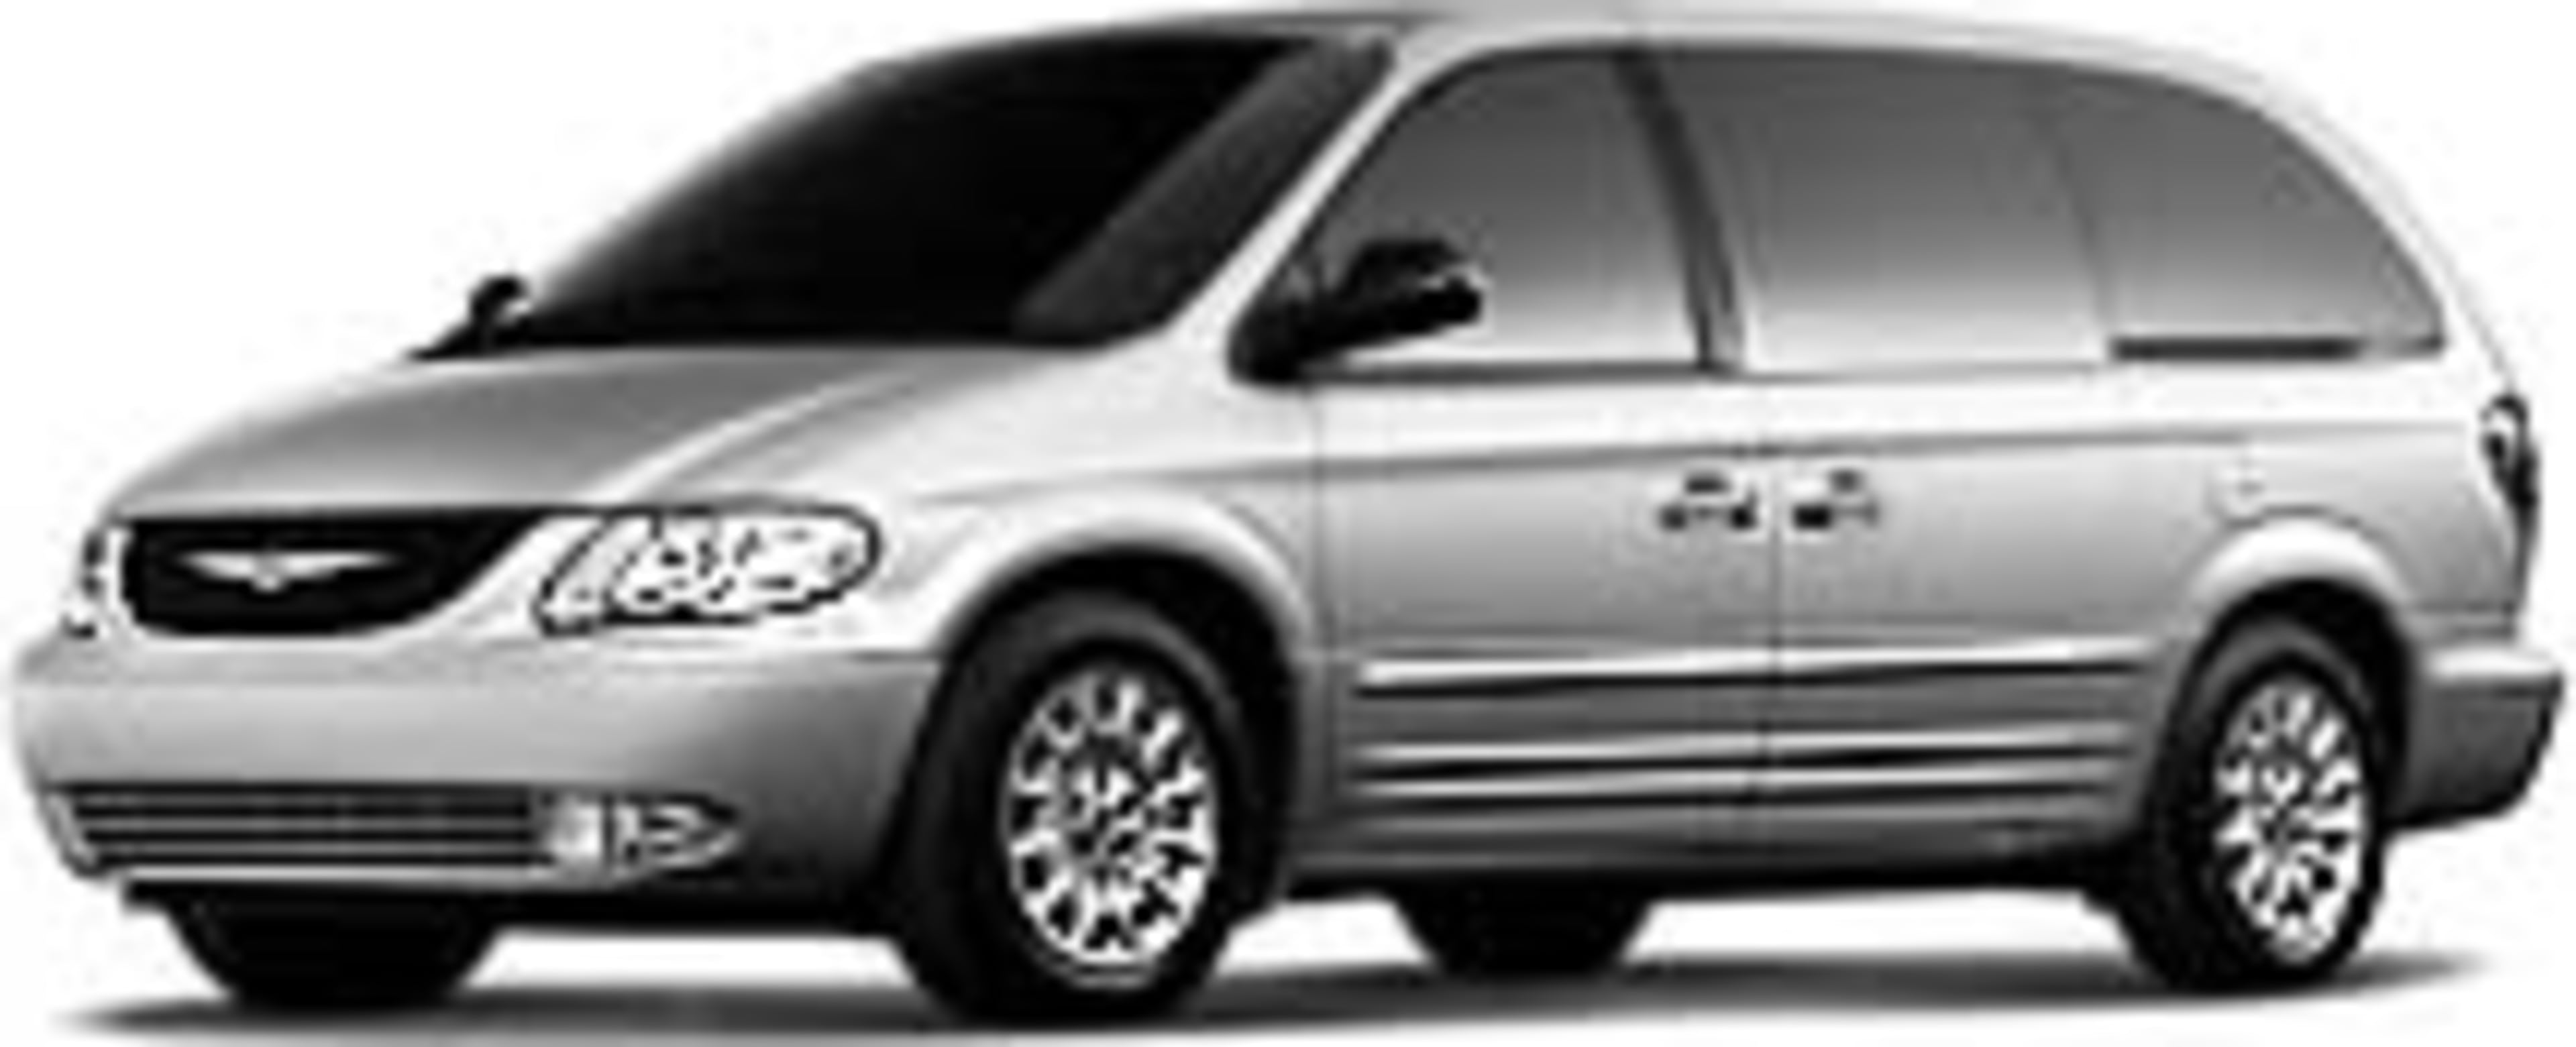 2002 Chrysler Town & Country Service and Repair Manual